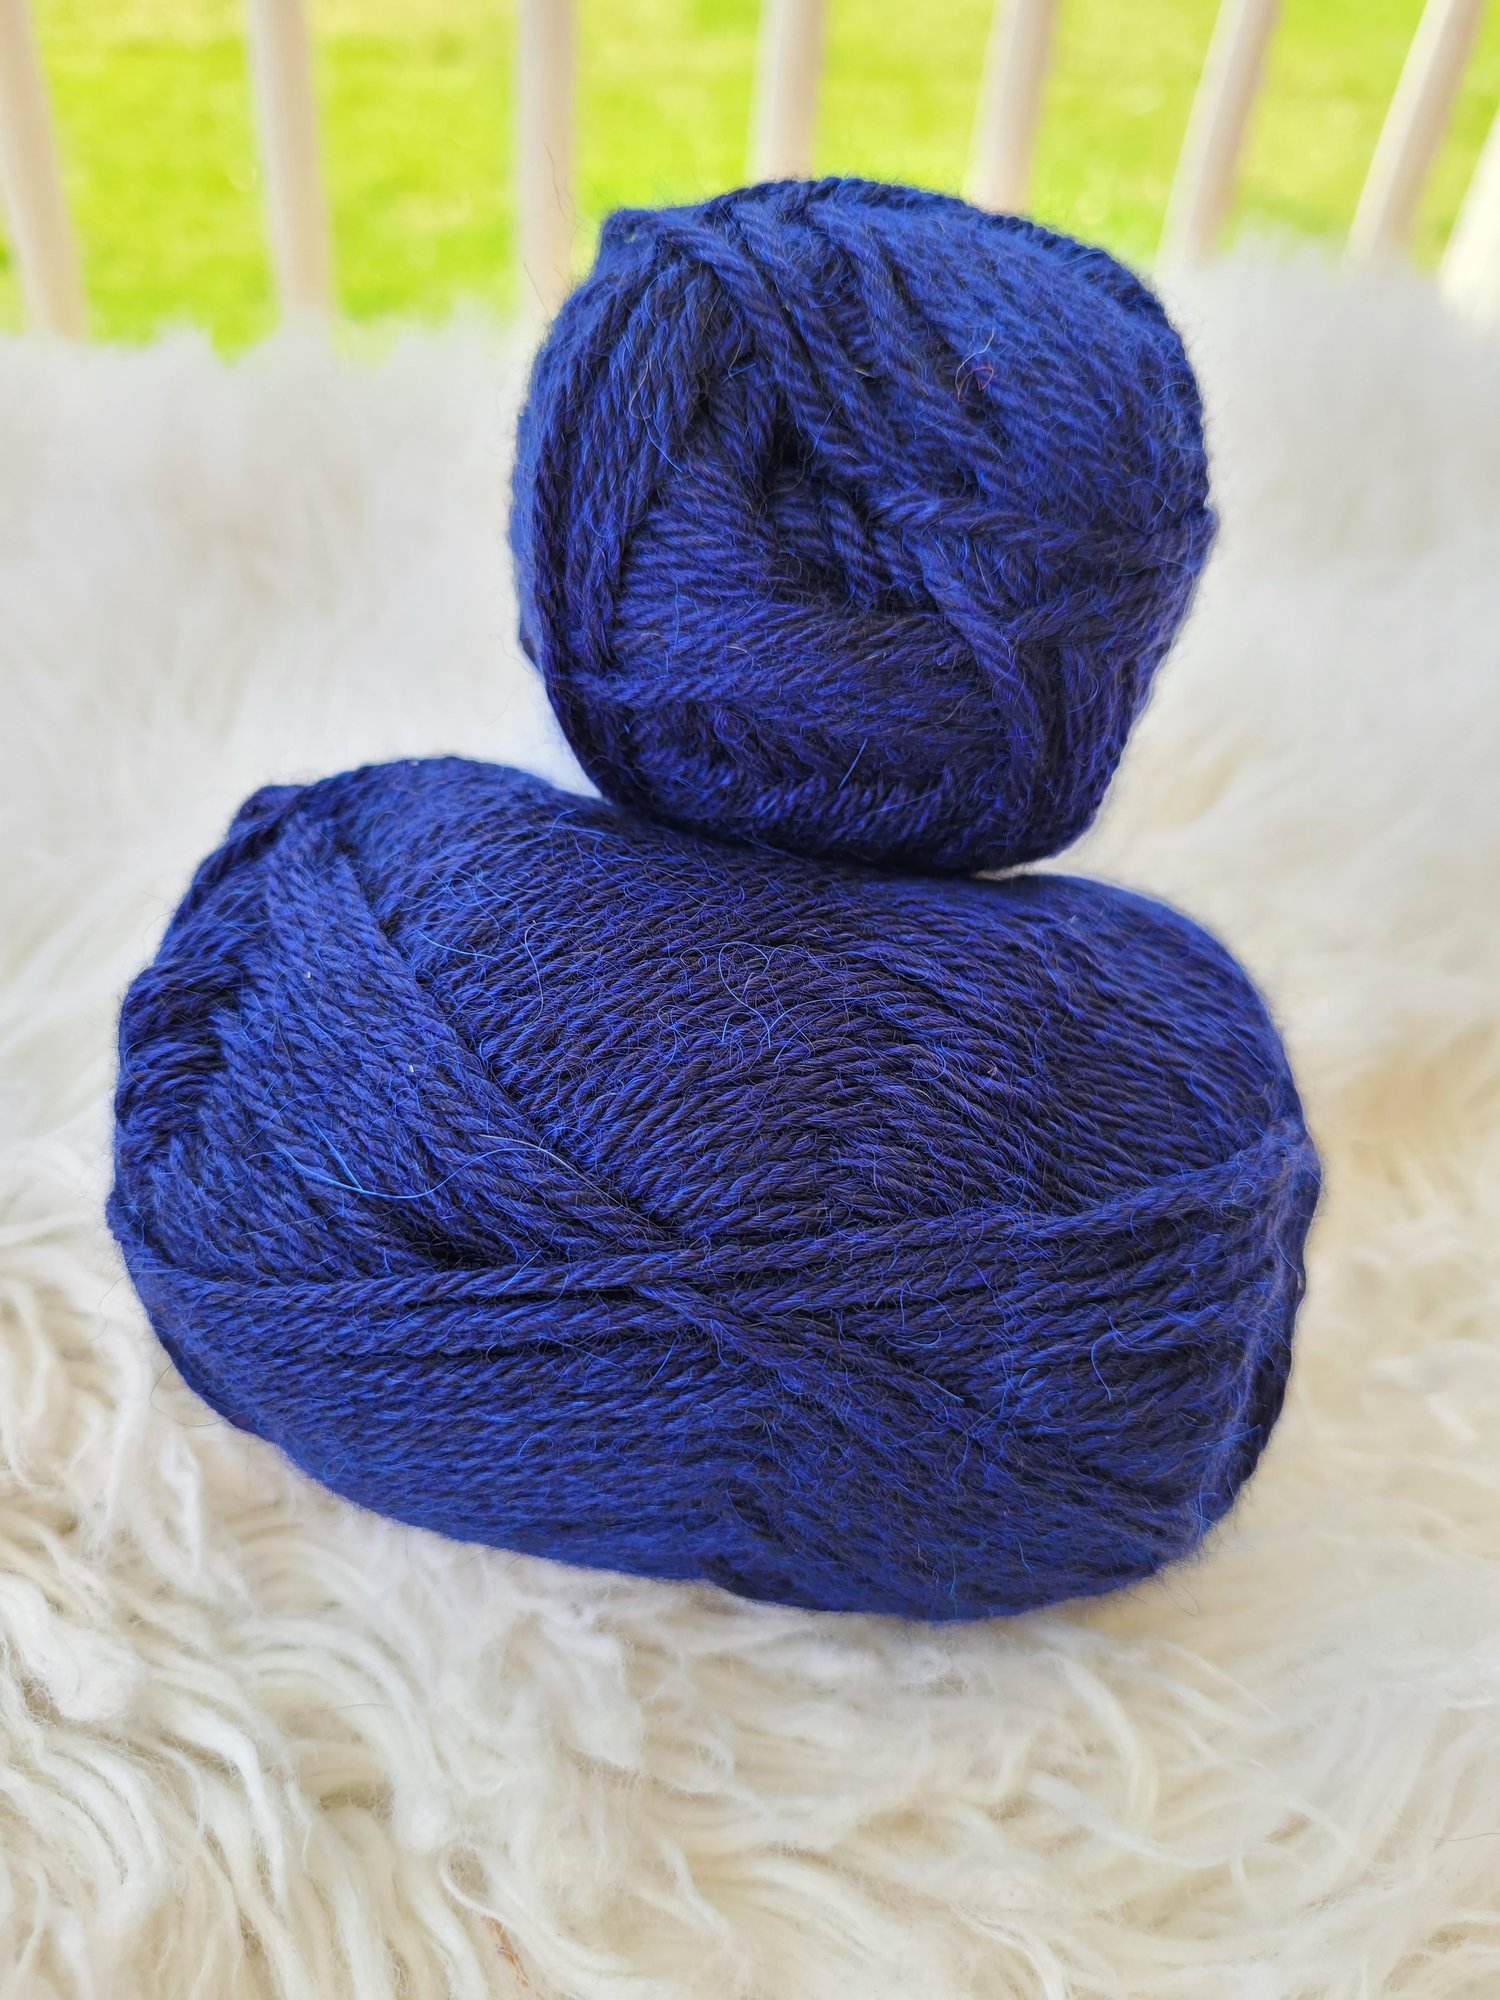 65% Wool and 35% Alpaca Yarn for Knitting and Crocheting, 3 or Light, Worsted, Dk Weight, Drops Lima, 1.8 oz 109 Yards per Ball (9016 Navy Blue)